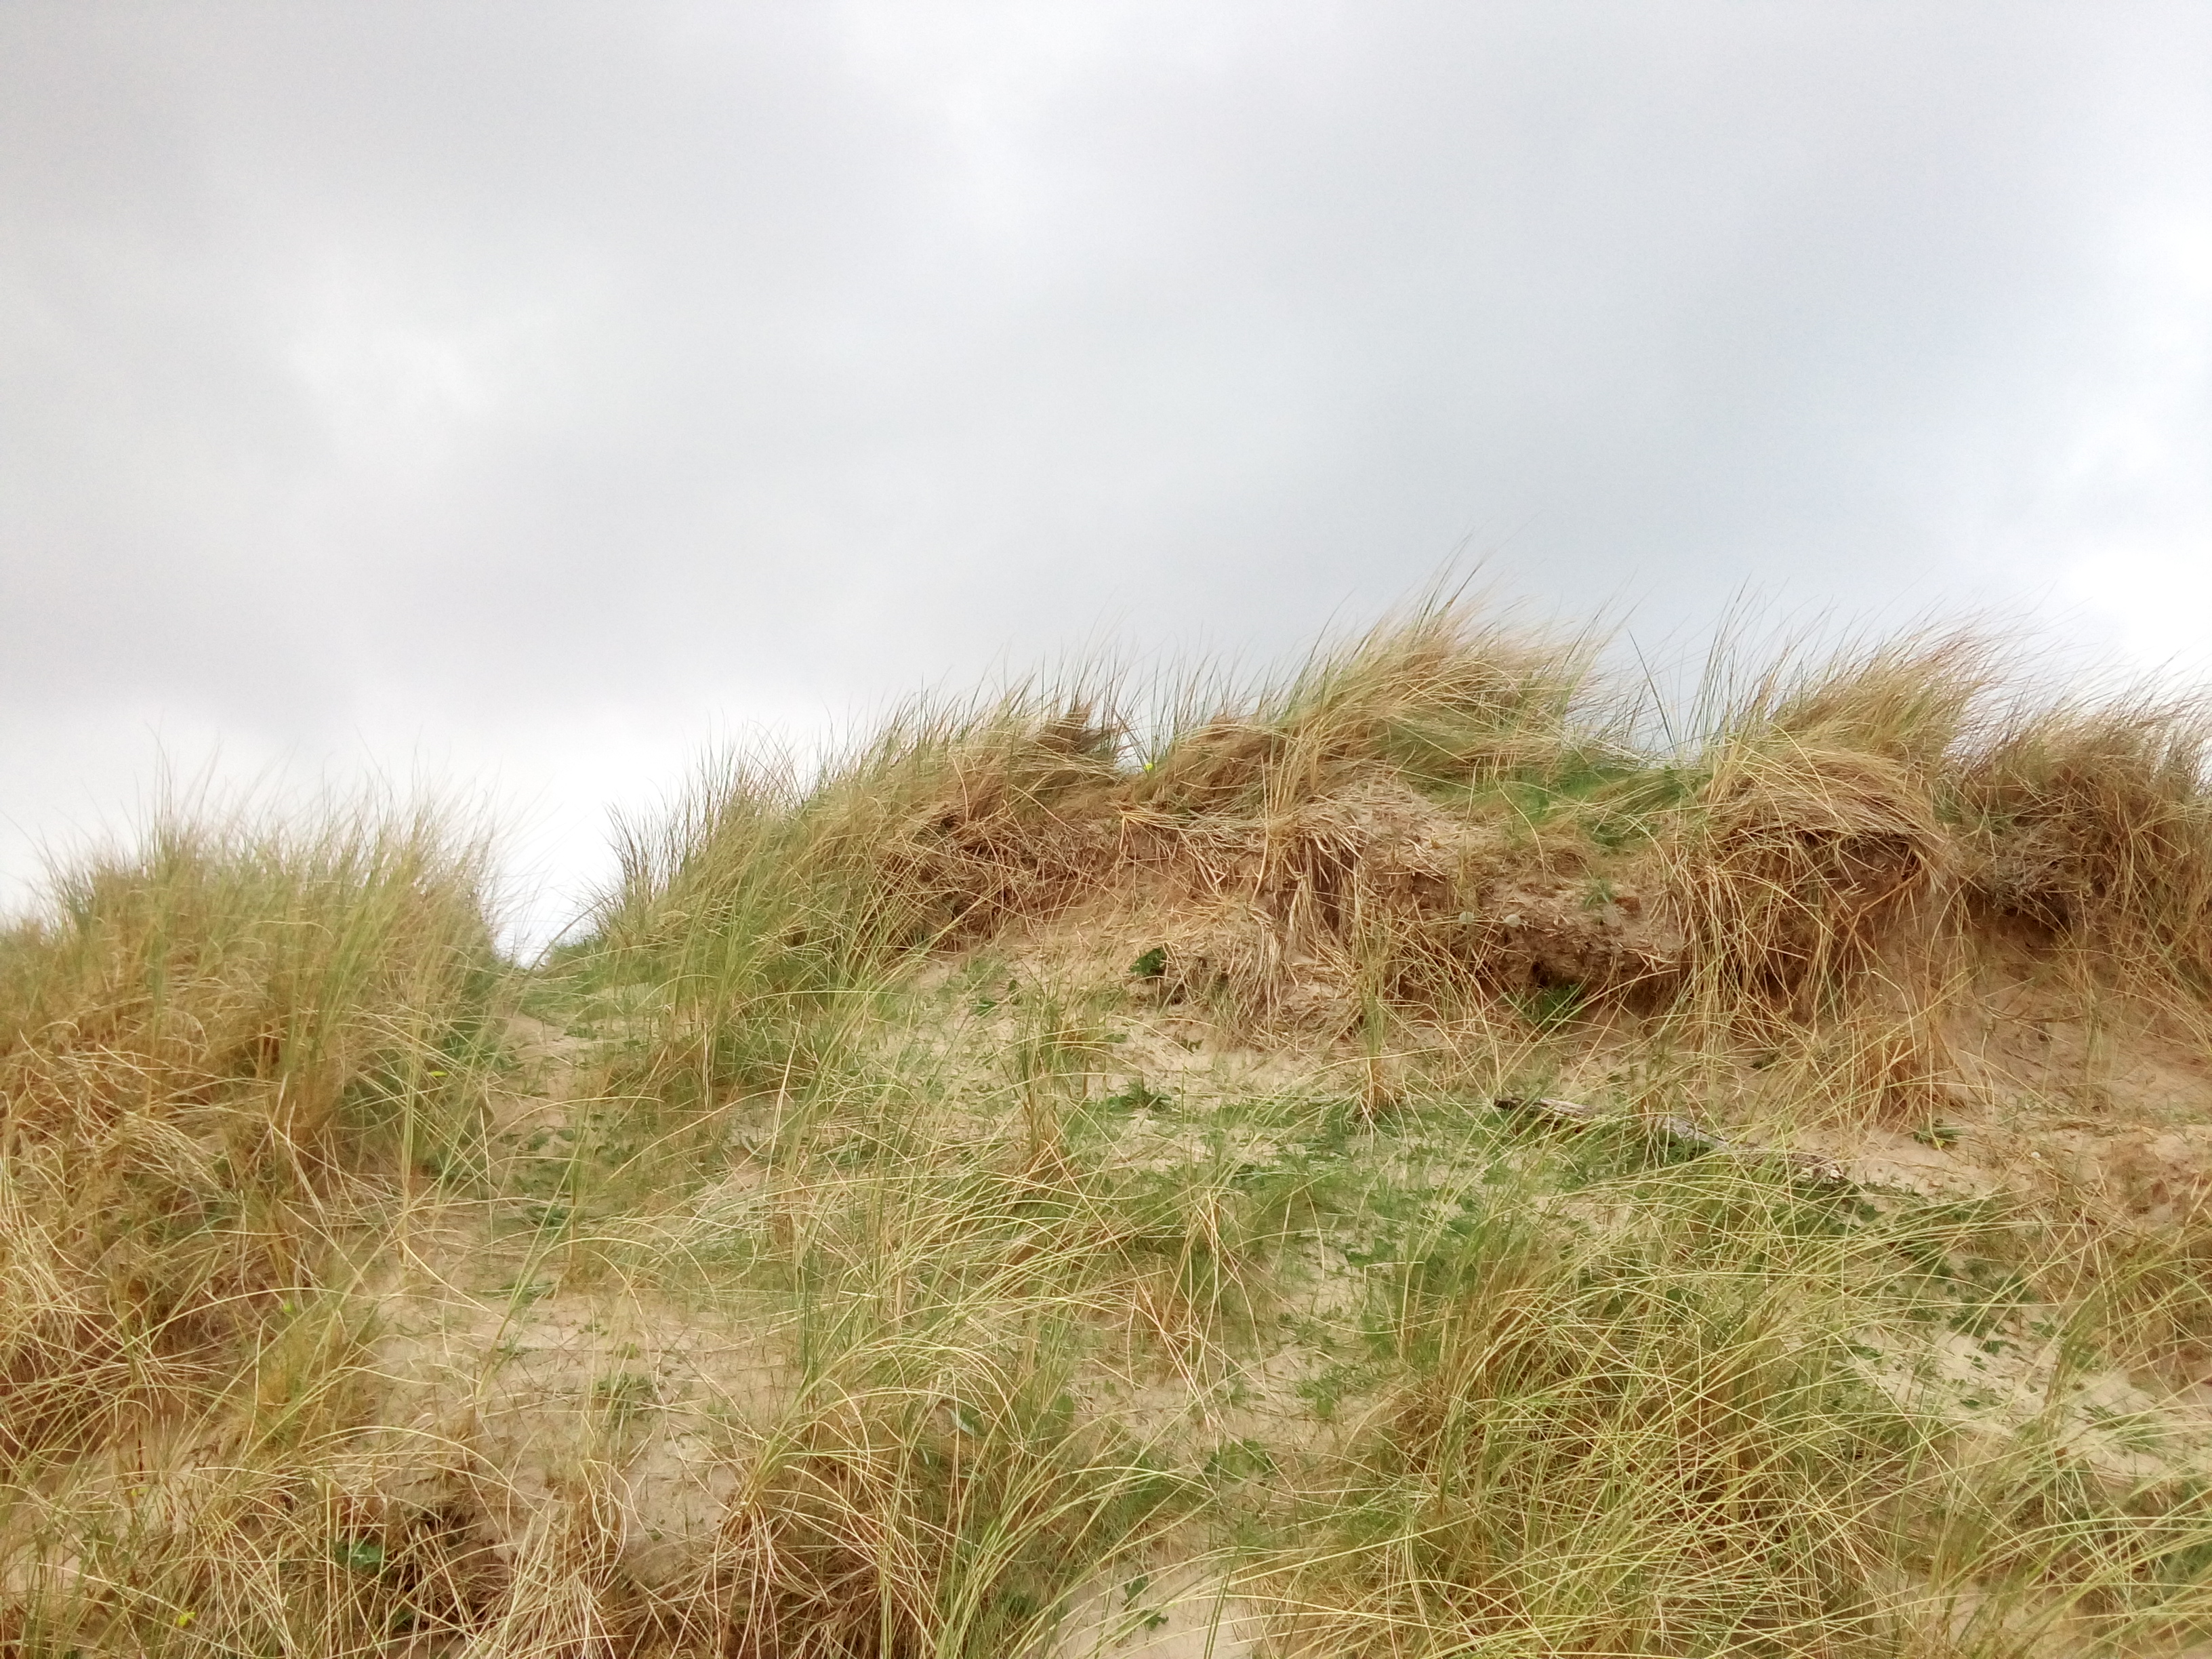 A grassy sand dune with cloud.